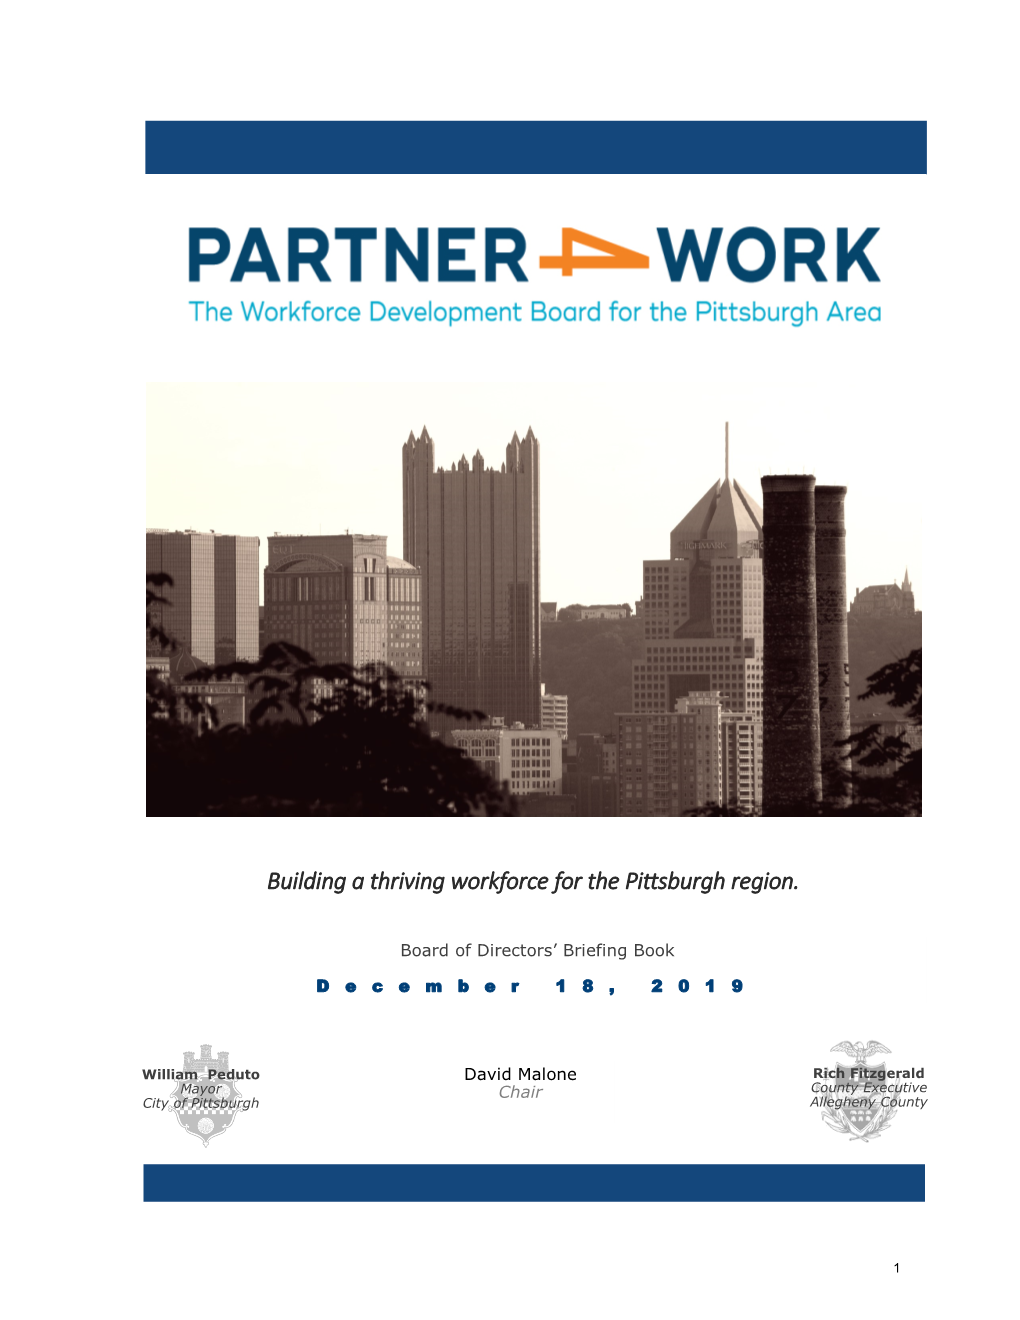 Building a Thriving Workforce for the Pittsburgh Region